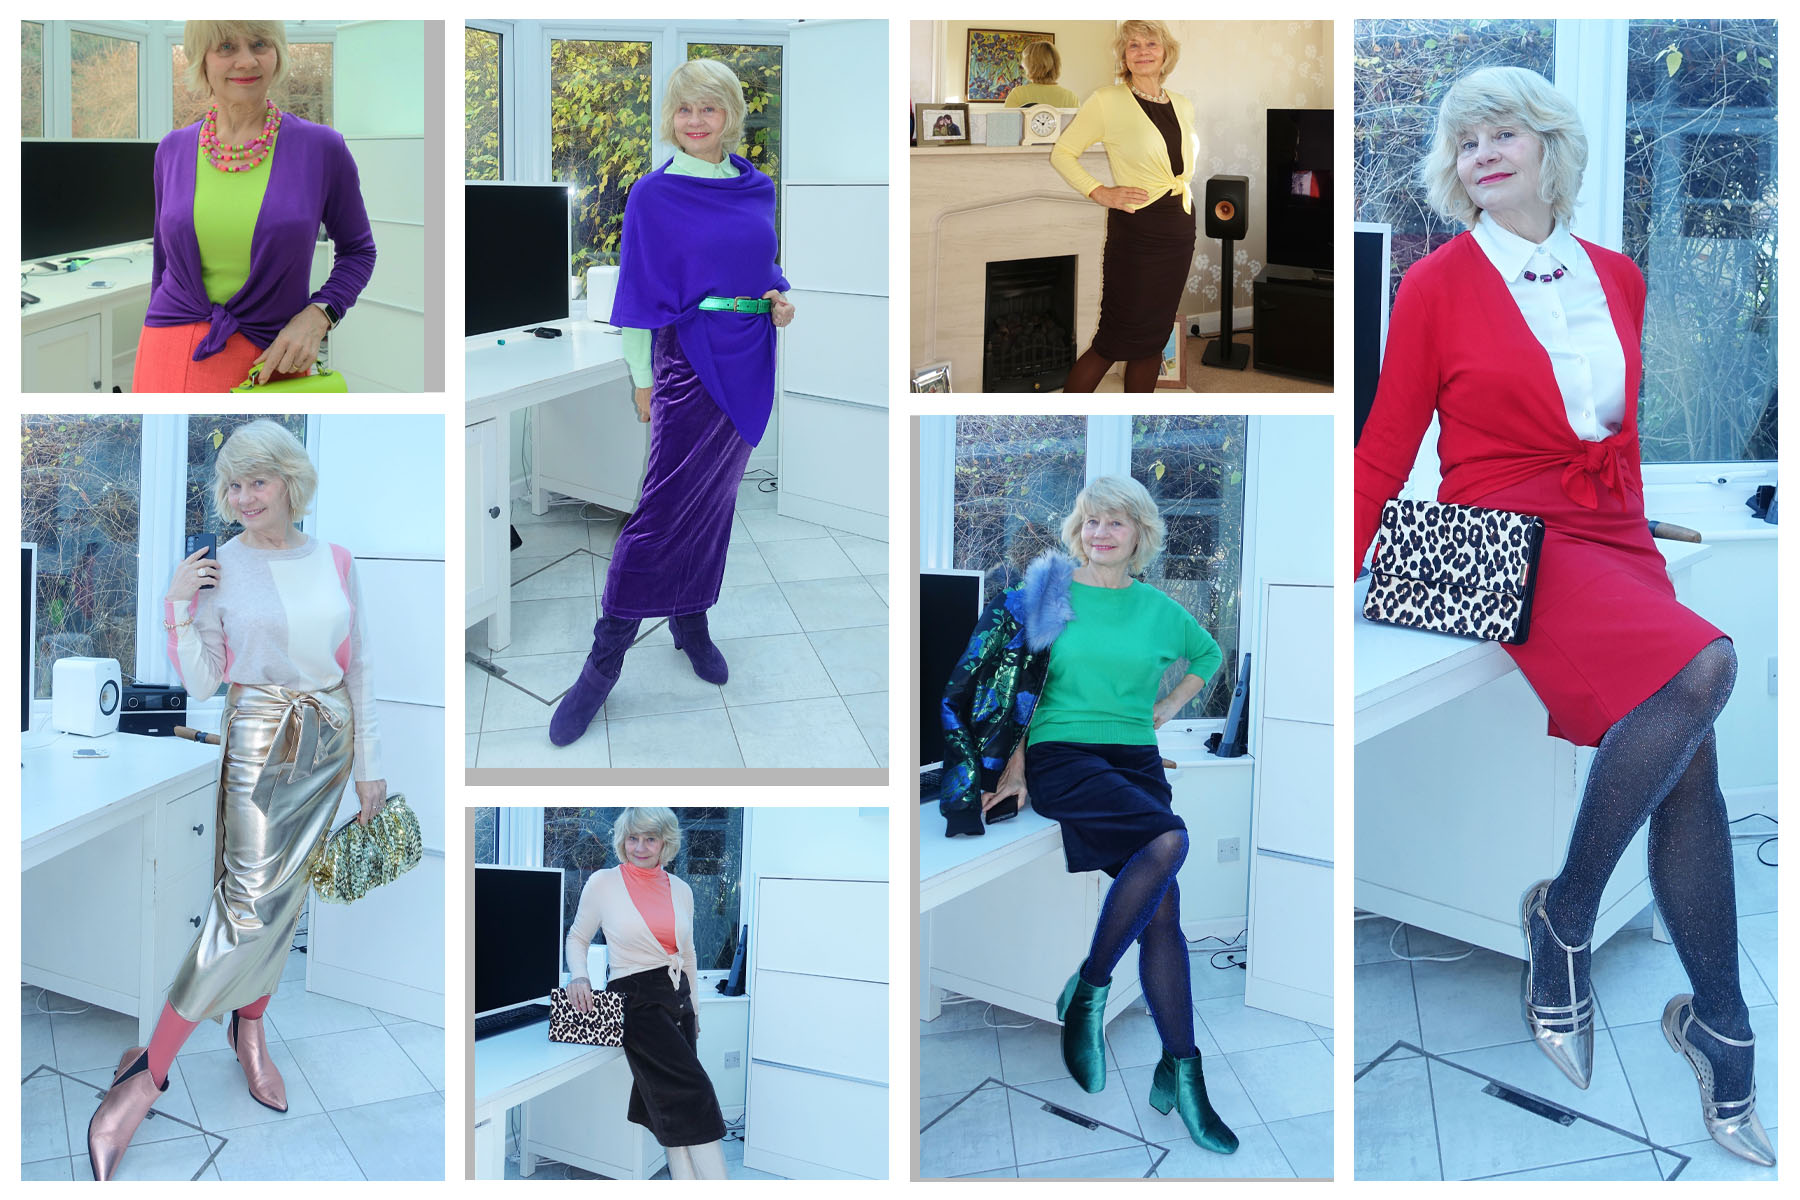 Seven outfits featuring skirts from the 7 Day Skirt Challenge on Instagram, worn by Is This Mutton blogger Gail Hanlon